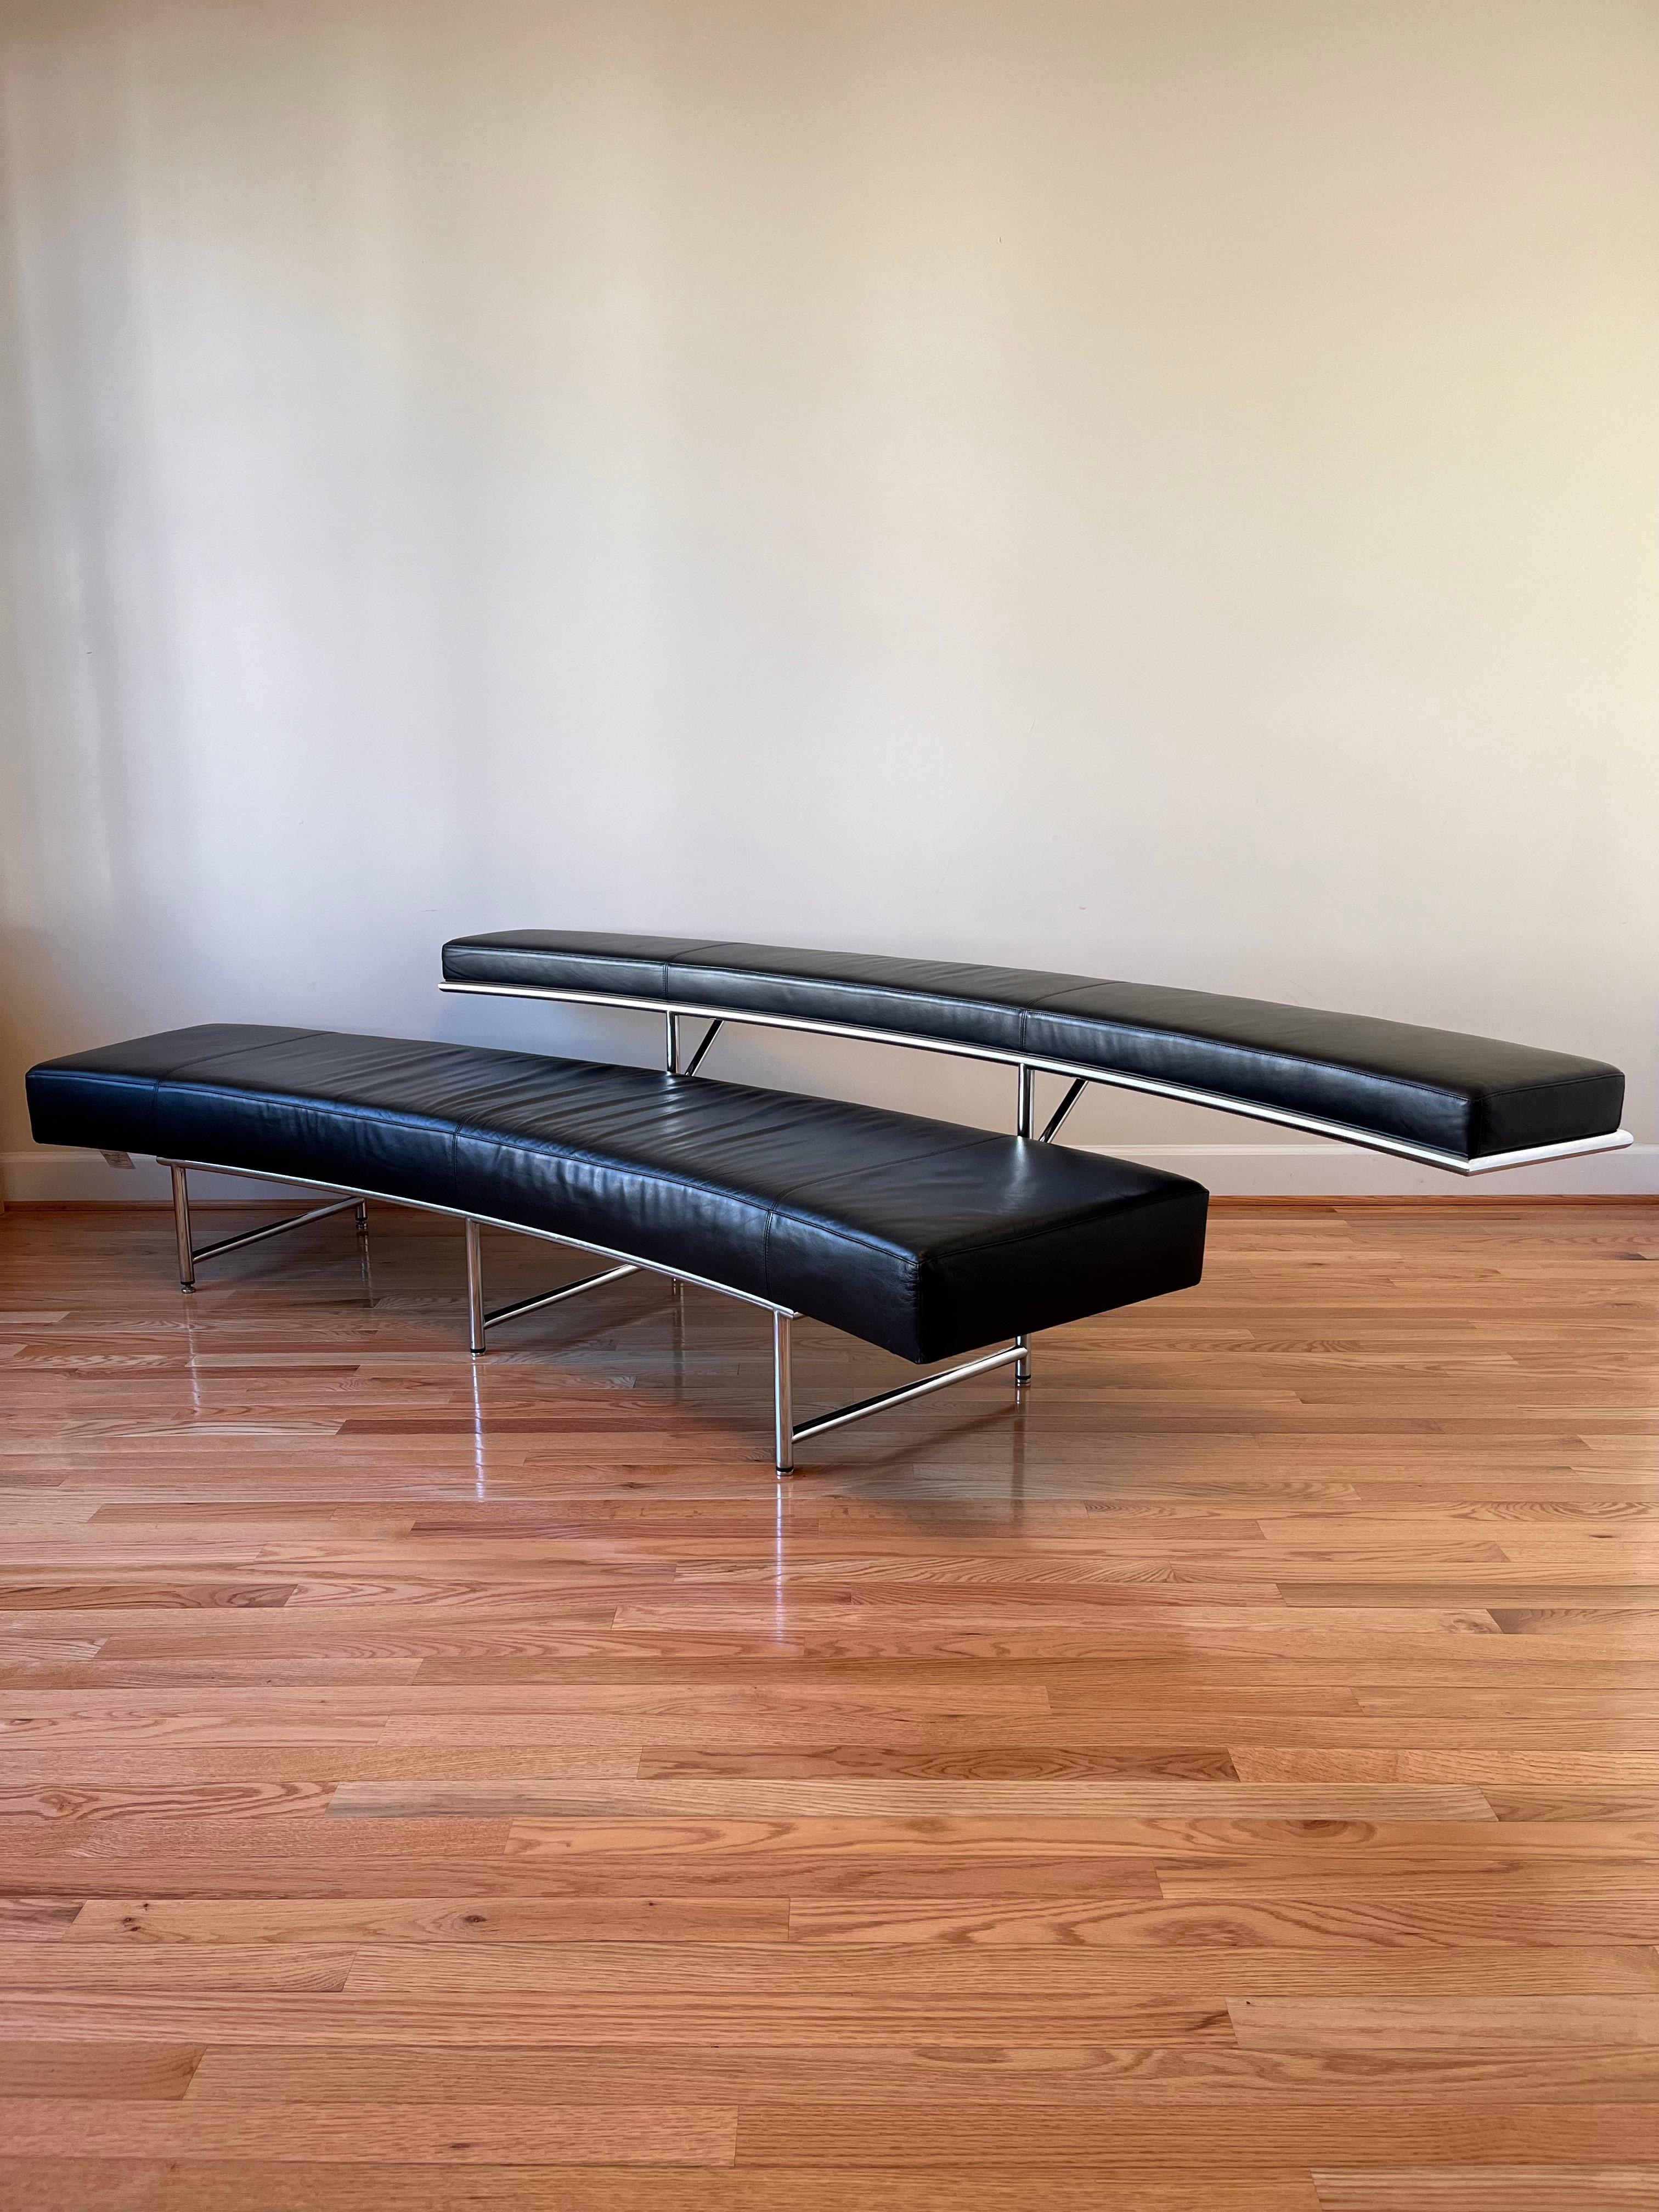 Monte carlo Ssofa
Eileen gray, 1929

Eileen Gray‘s perhaps most exclusive sofa radiates an allure from which no beholder can escape. 

The soft curve, the most unusual lines of the backrest make the Monte Carlo an incomparable and striking